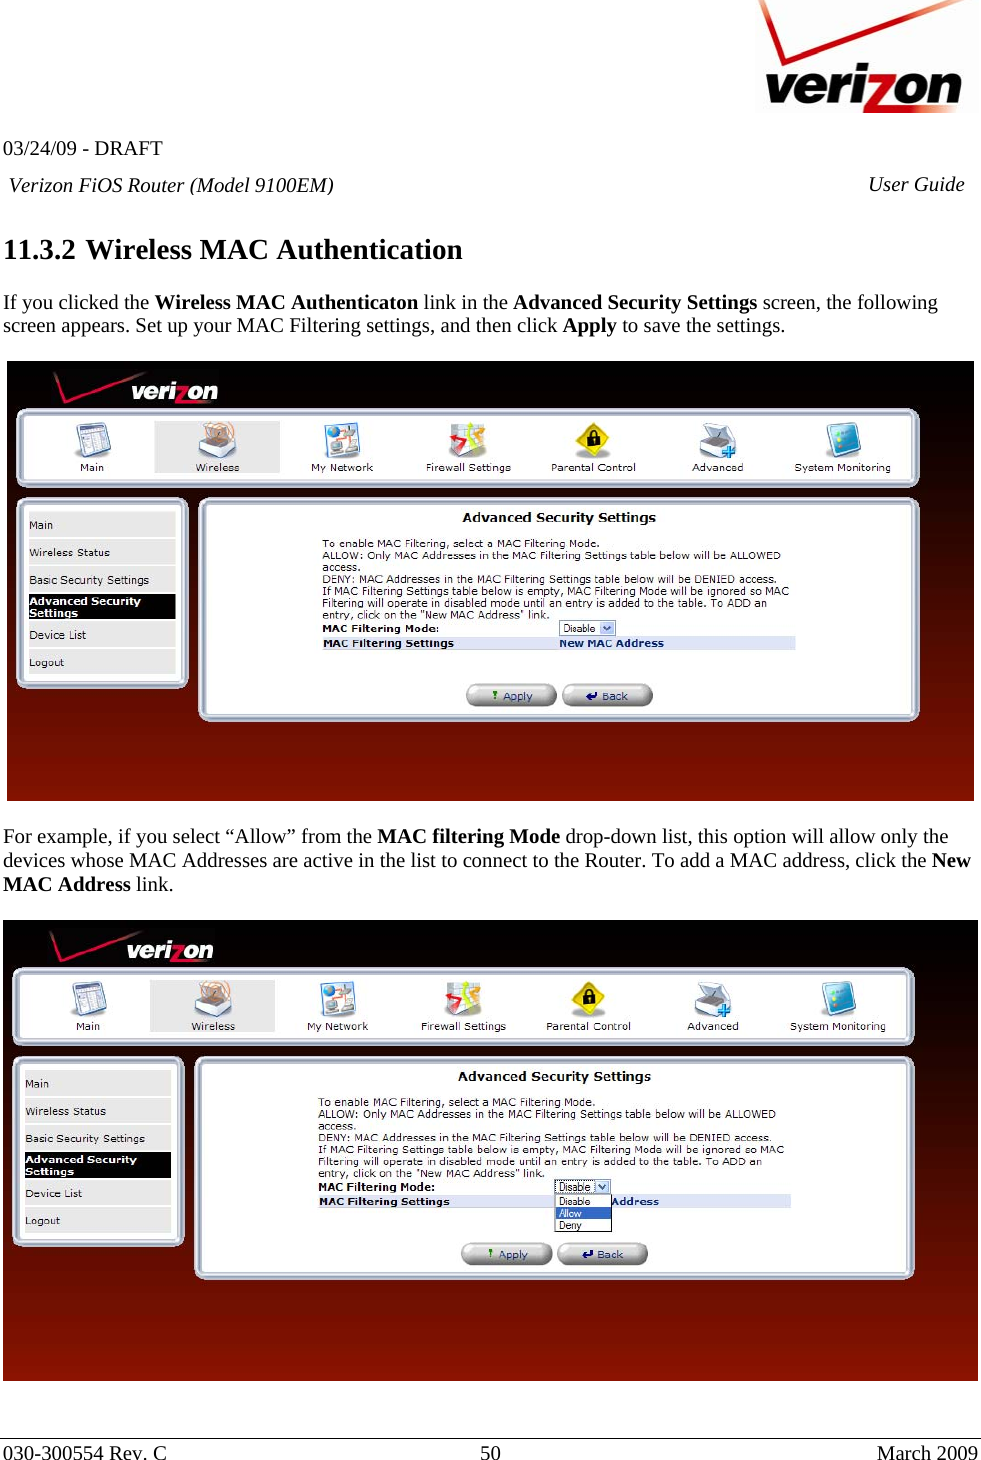   03/24/09 - DRAFT   030-300554 Rev. C  50      March 2009  Verizon FiOS Router (Model 9100EM) User Guide 11.3.2  Wireless MAC Authentication  If you clicked the Wireless MAC Authenticaton link in the Advanced Security Settings screen, the following screen appears. Set up your MAC Filtering settings, and then click Apply to save the settings.    For example, if you select “Allow” from the MAC filtering Mode drop-down list, this option will allow only the devices whose MAC Addresses are active in the list to connect to the Router. To add a MAC address, click the New MAC Address link.      